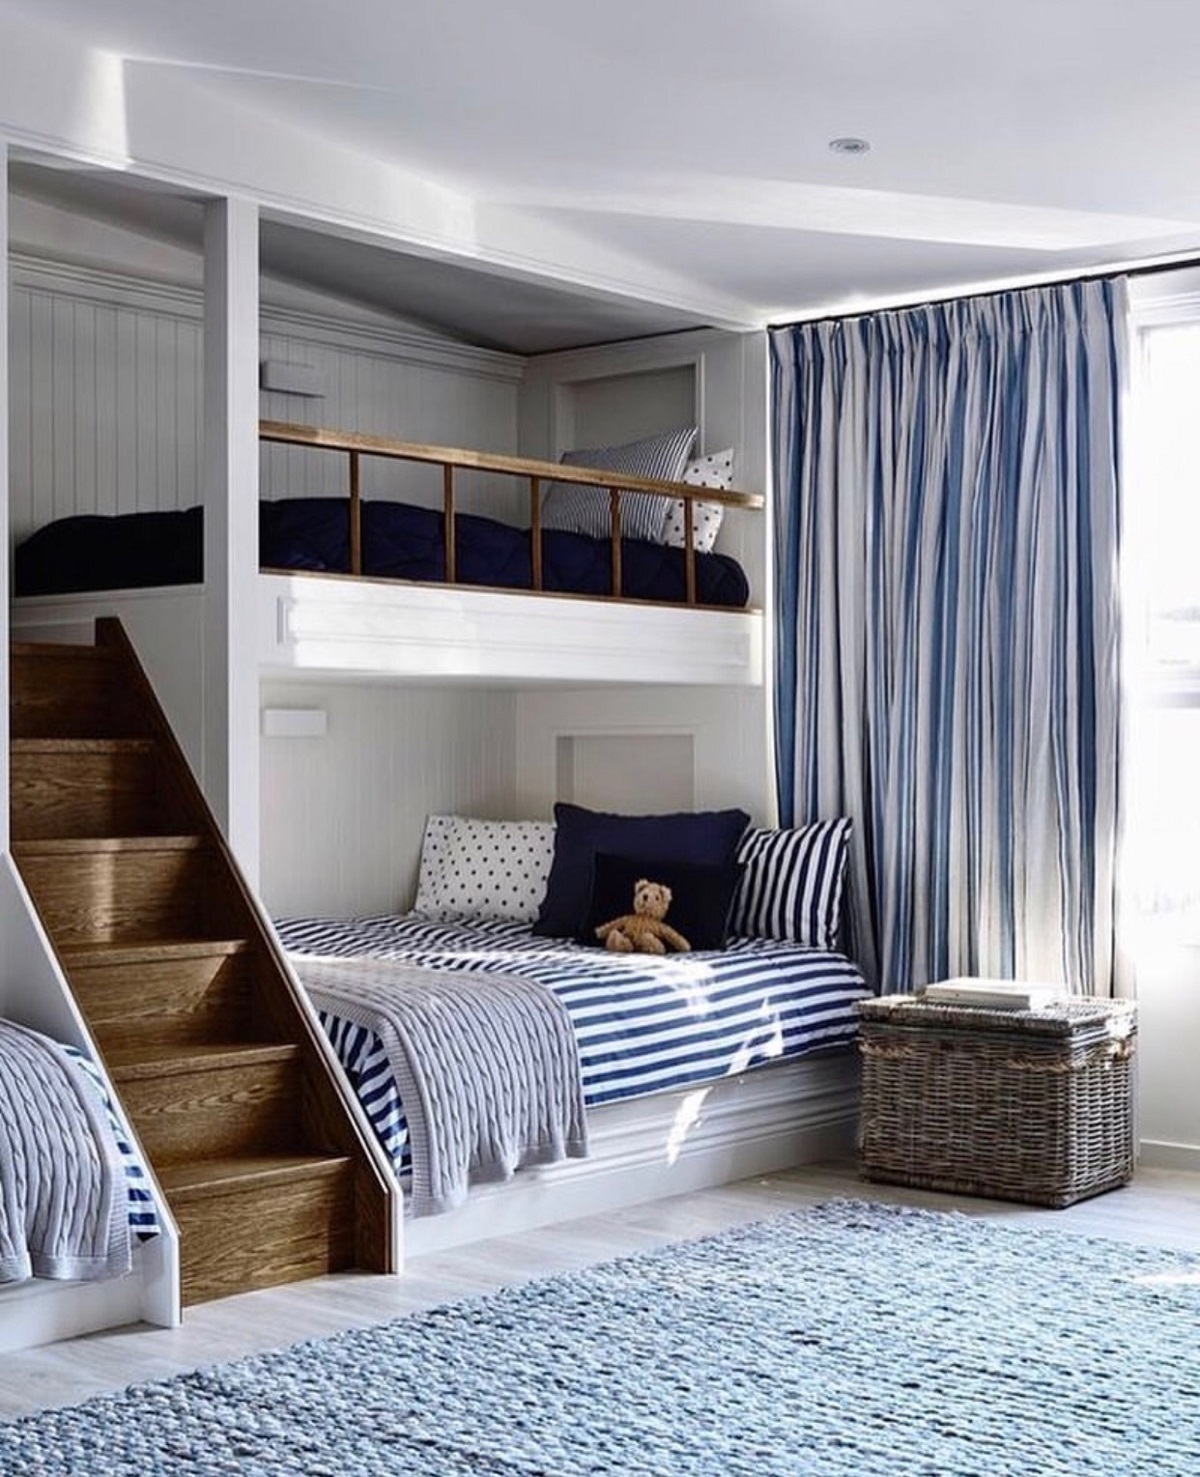 This coastal-style children's room designed by Adelaide Bragg boasts a luxe version of a bunk bed. The custom built-in beds are spacious, with the bottom bunk able to accommodate a double mattress.